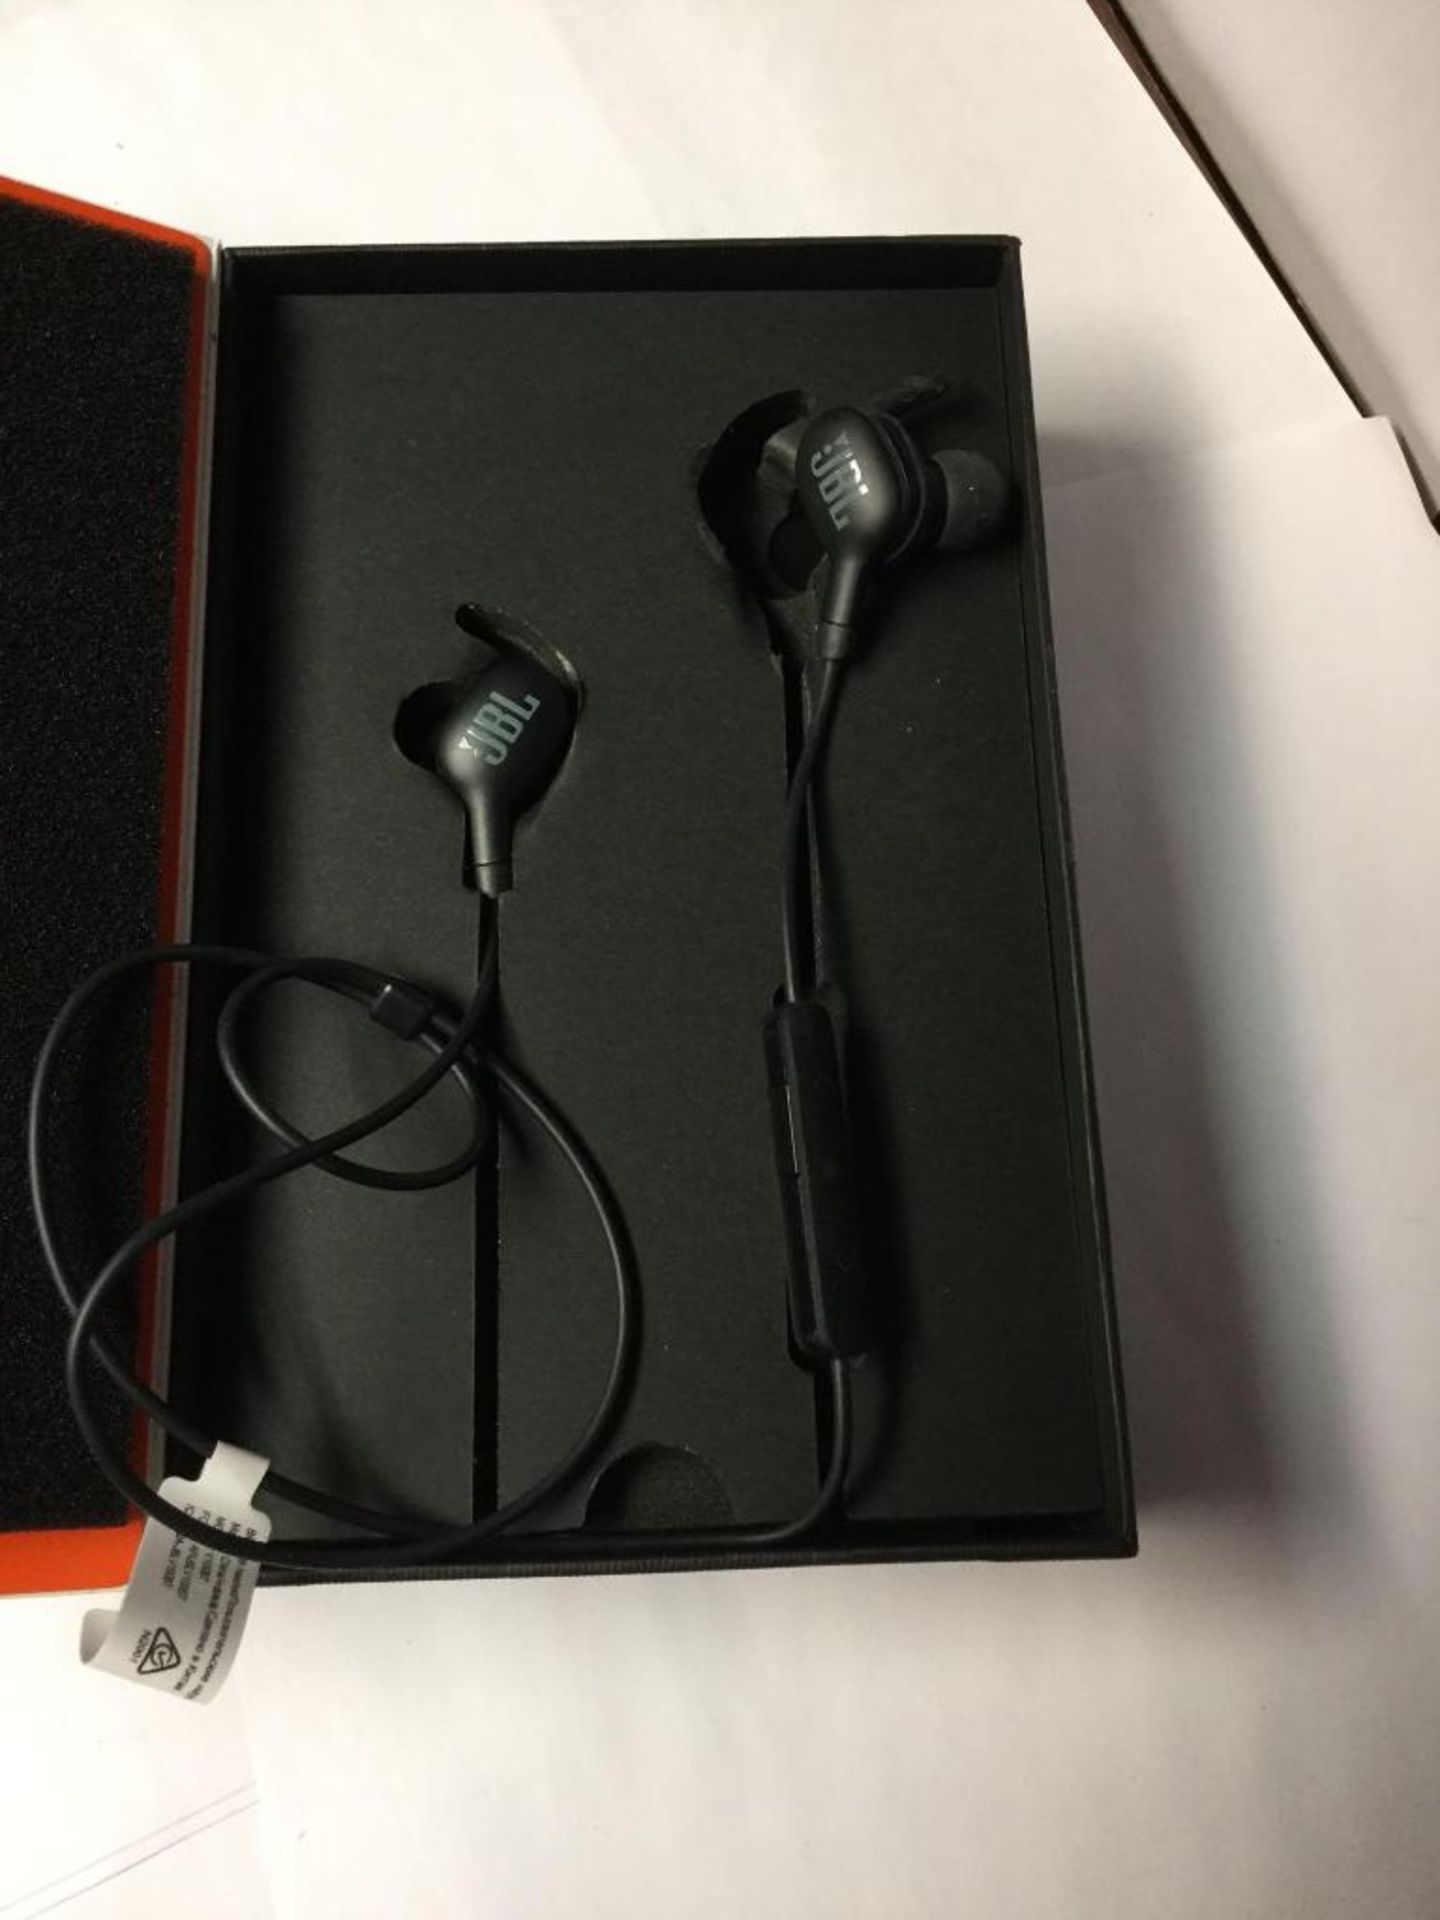 UBL Everest Wireless Bluetooth in Ear Headphones - Image 2 of 2